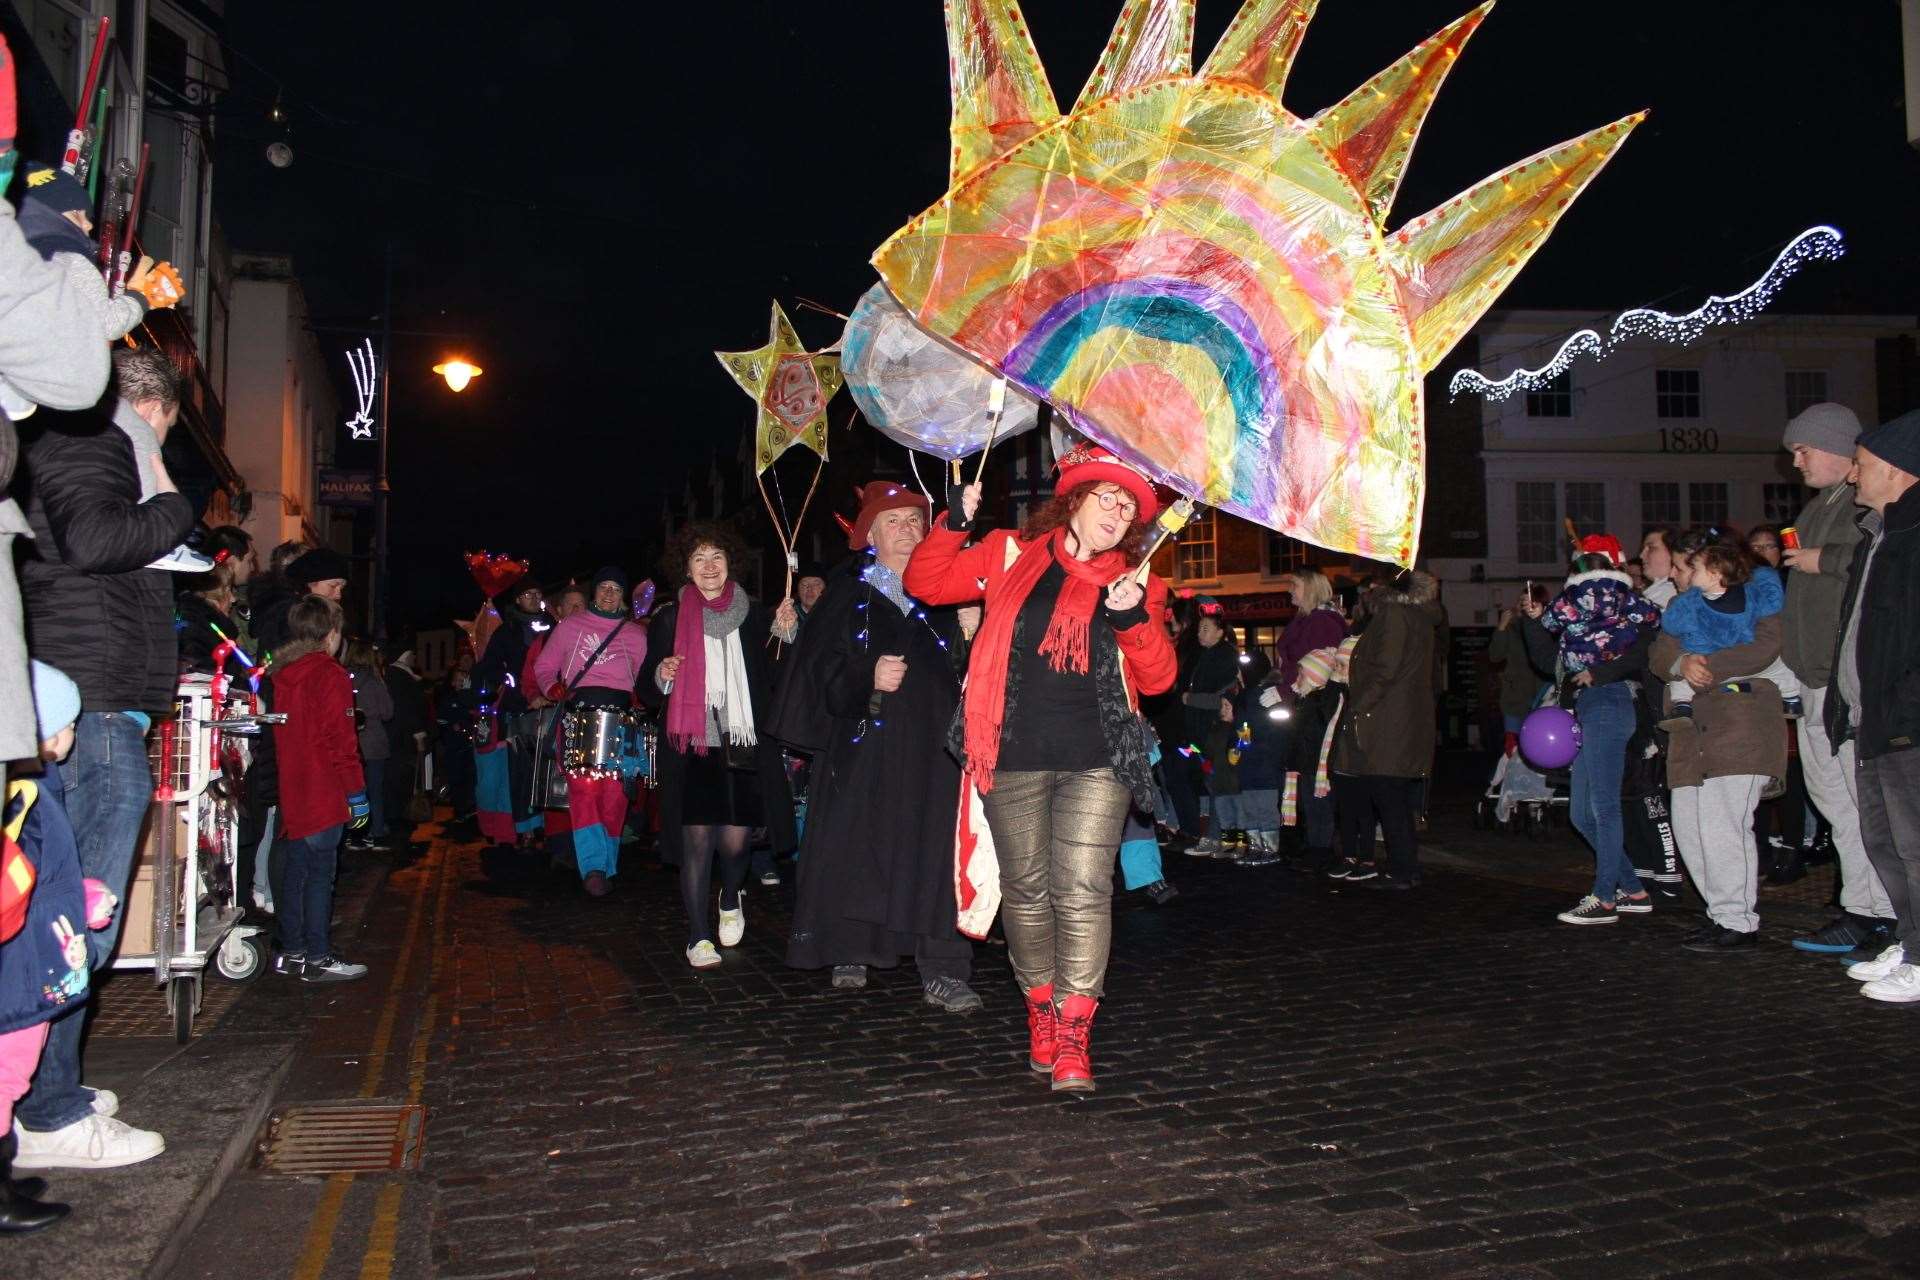 Chris Reed of Big Fish Arts leads the Sheppey lantern parade at the Sheerness Christmas lights switch-on (20889730)